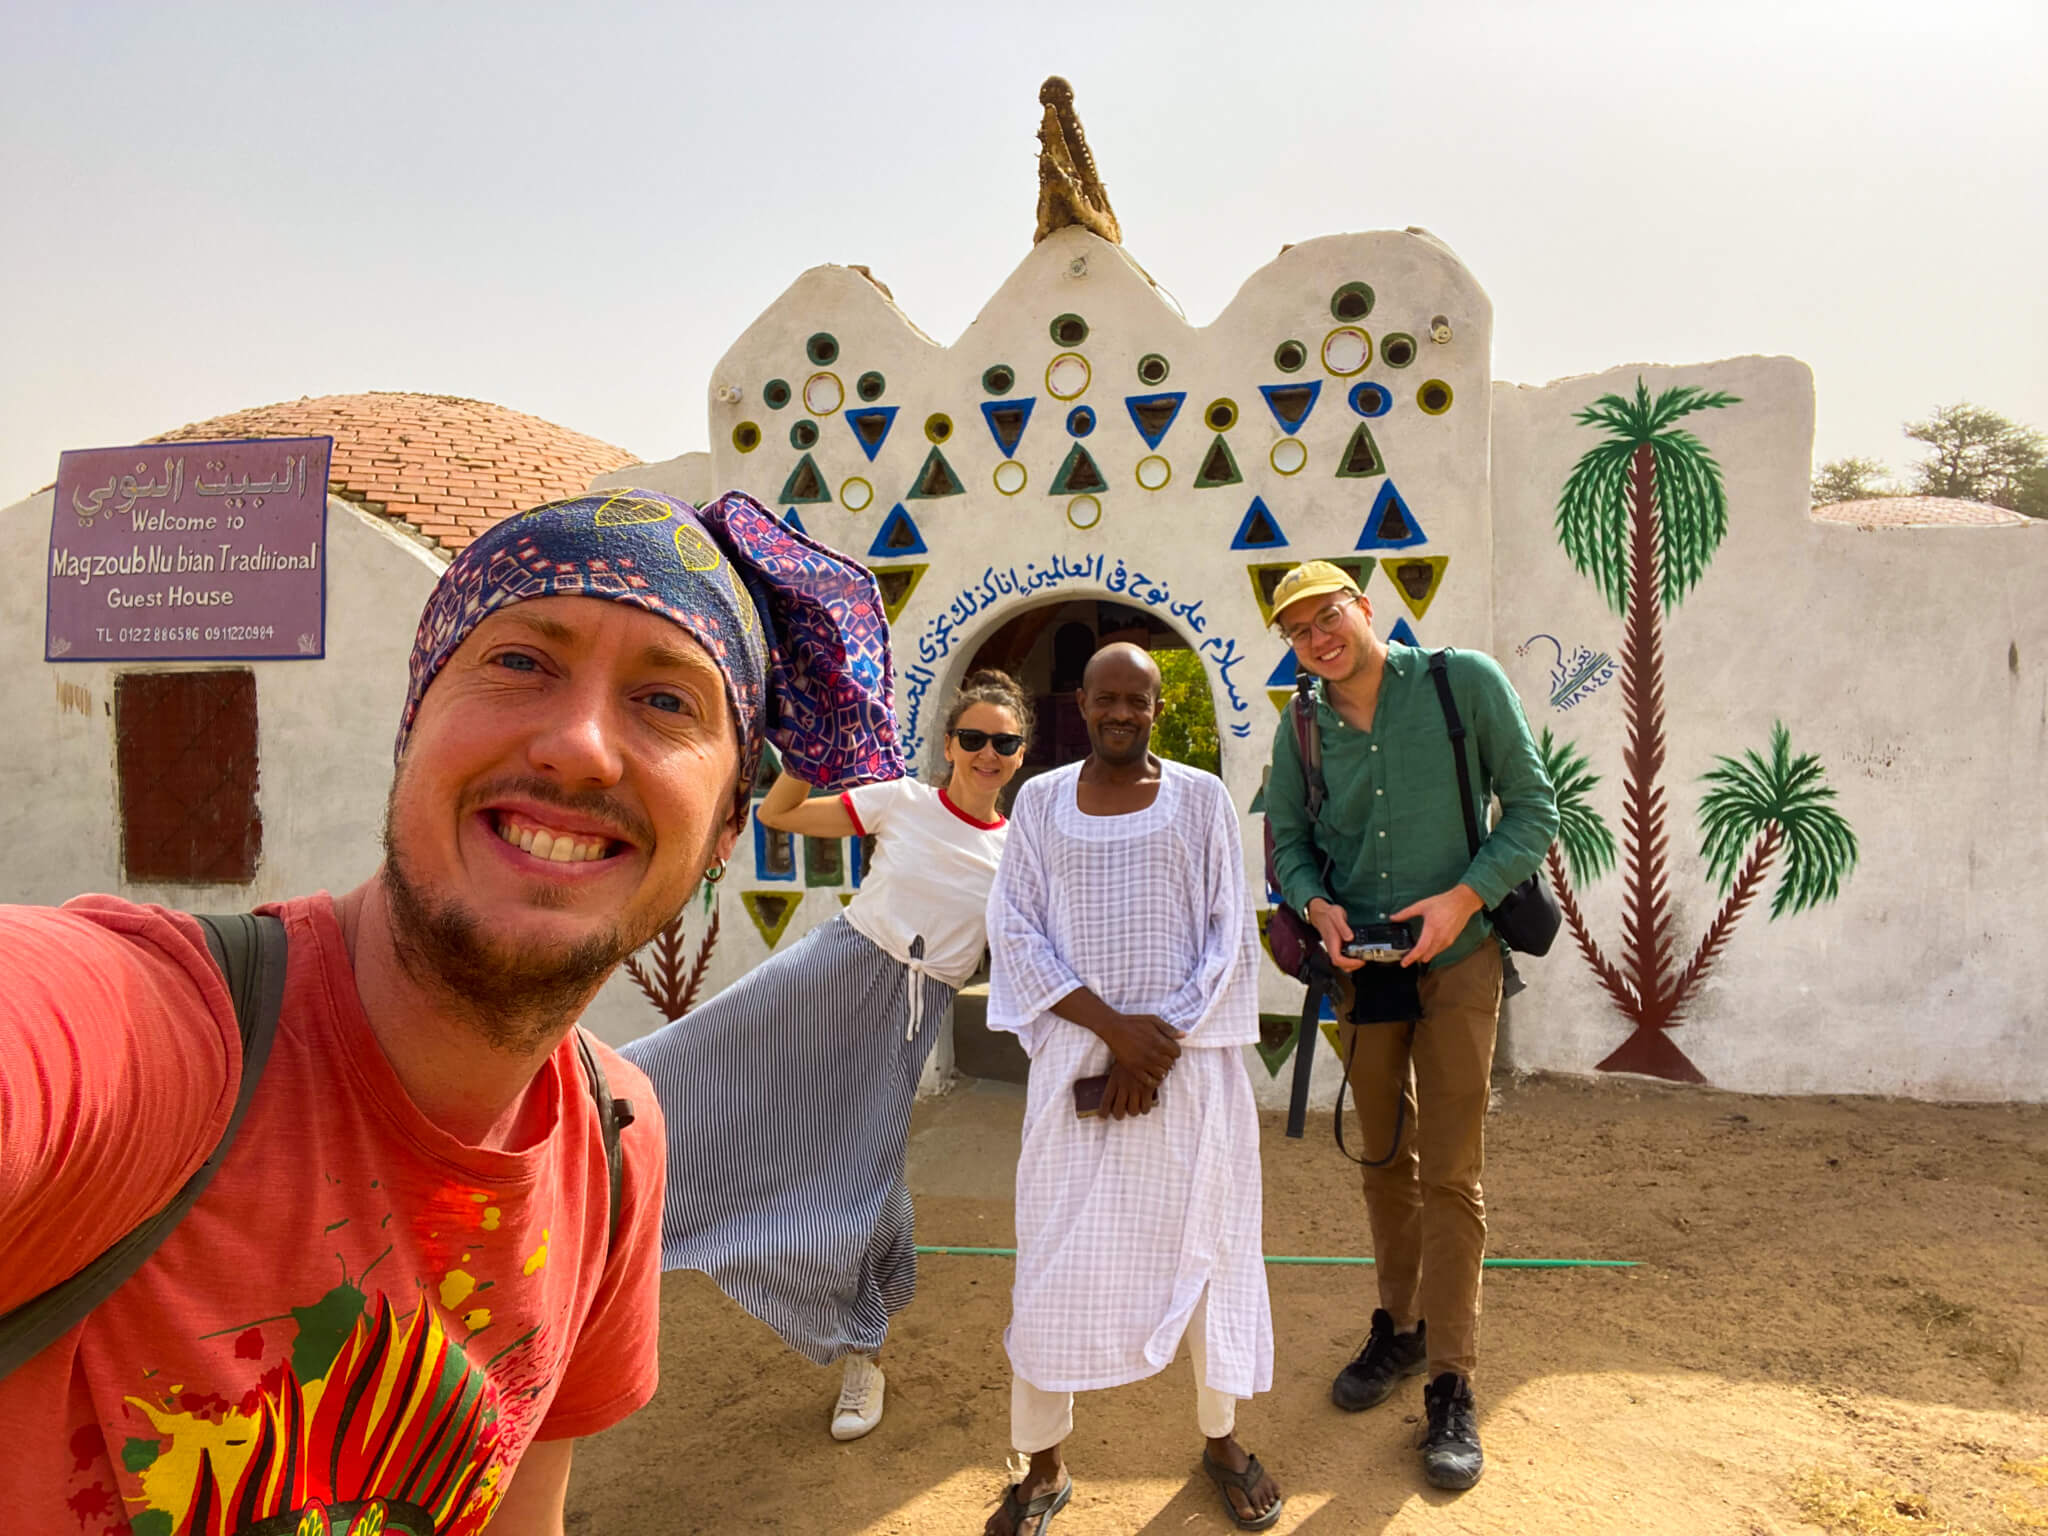 Me, Anna and a South African friend in front of the white-painted walls of the Magzoub Nubian Guest House.  